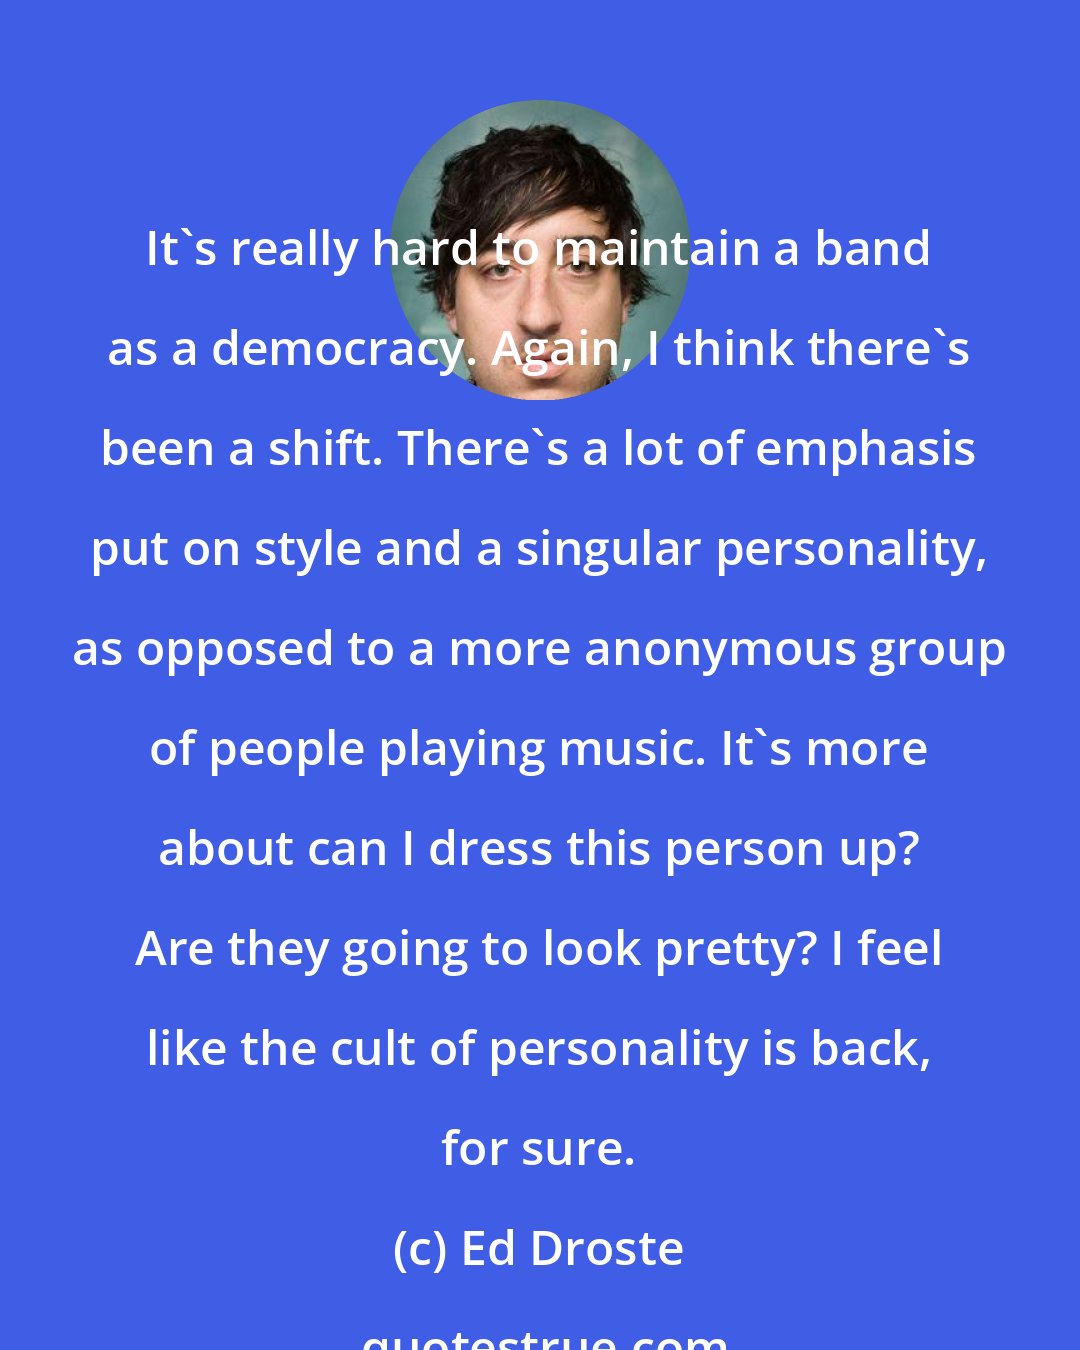 Ed Droste: It's really hard to maintain a band as a democracy. Again, I think there's been a shift. There's a lot of emphasis put on style and a singular personality, as opposed to a more anonymous group of people playing music. It's more about can I dress this person up? Are they going to look pretty? I feel like the cult of personality is back, for sure.